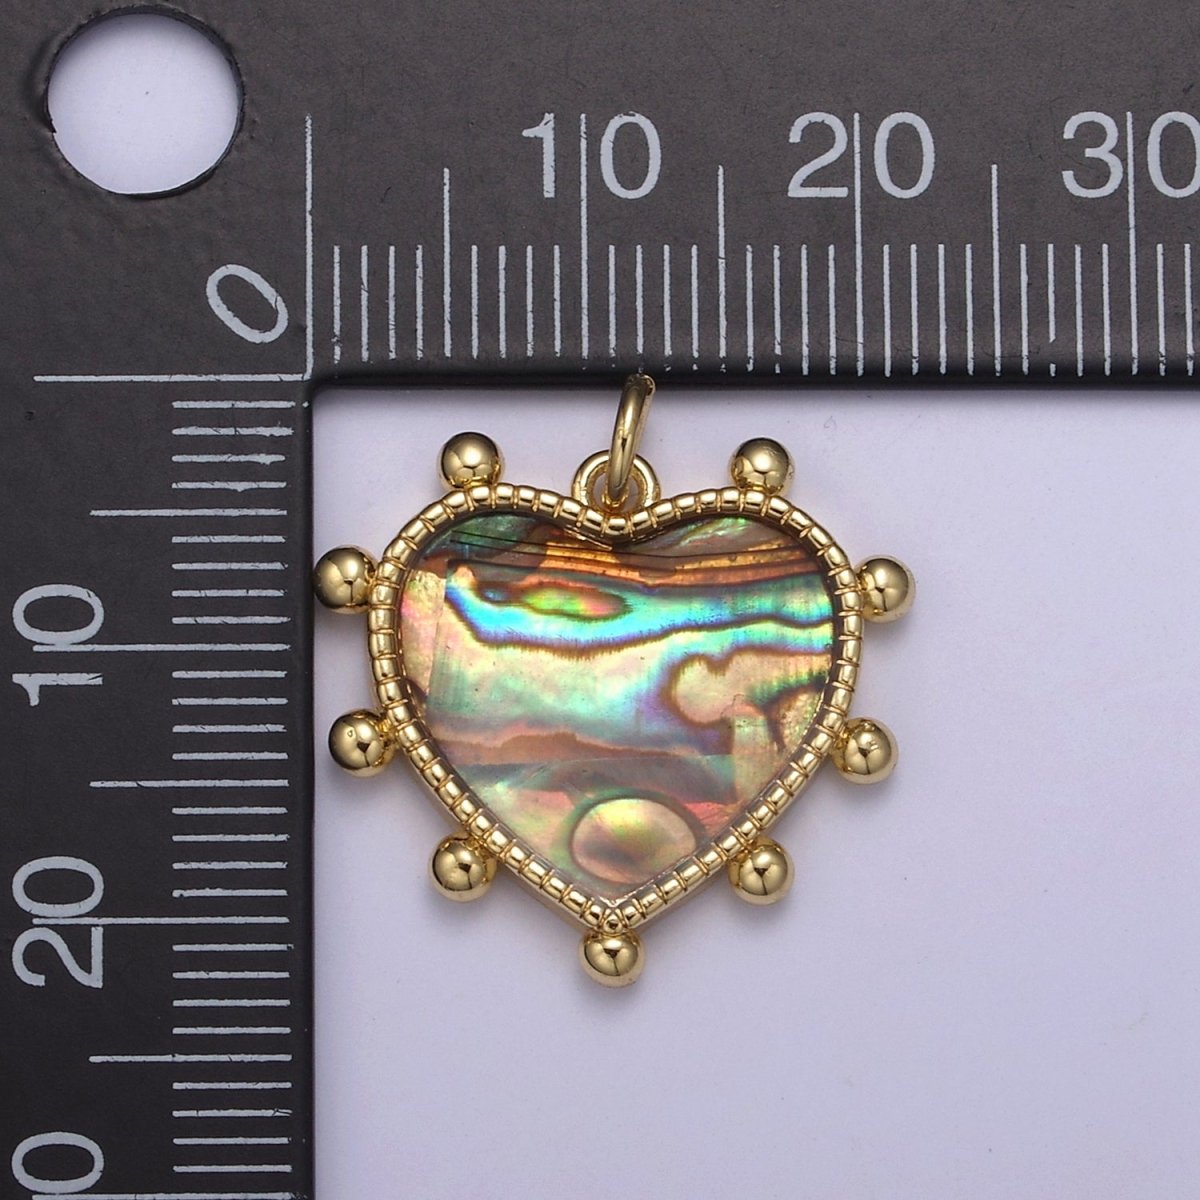 14K Gold Filled Pearl, Tiger Eye, Turquoise Abalone Shell Charm Pendant Beaded Heart Love Charm for Necklace Bracelet Jewelry Making N-642 - N-646 - DLUXCA